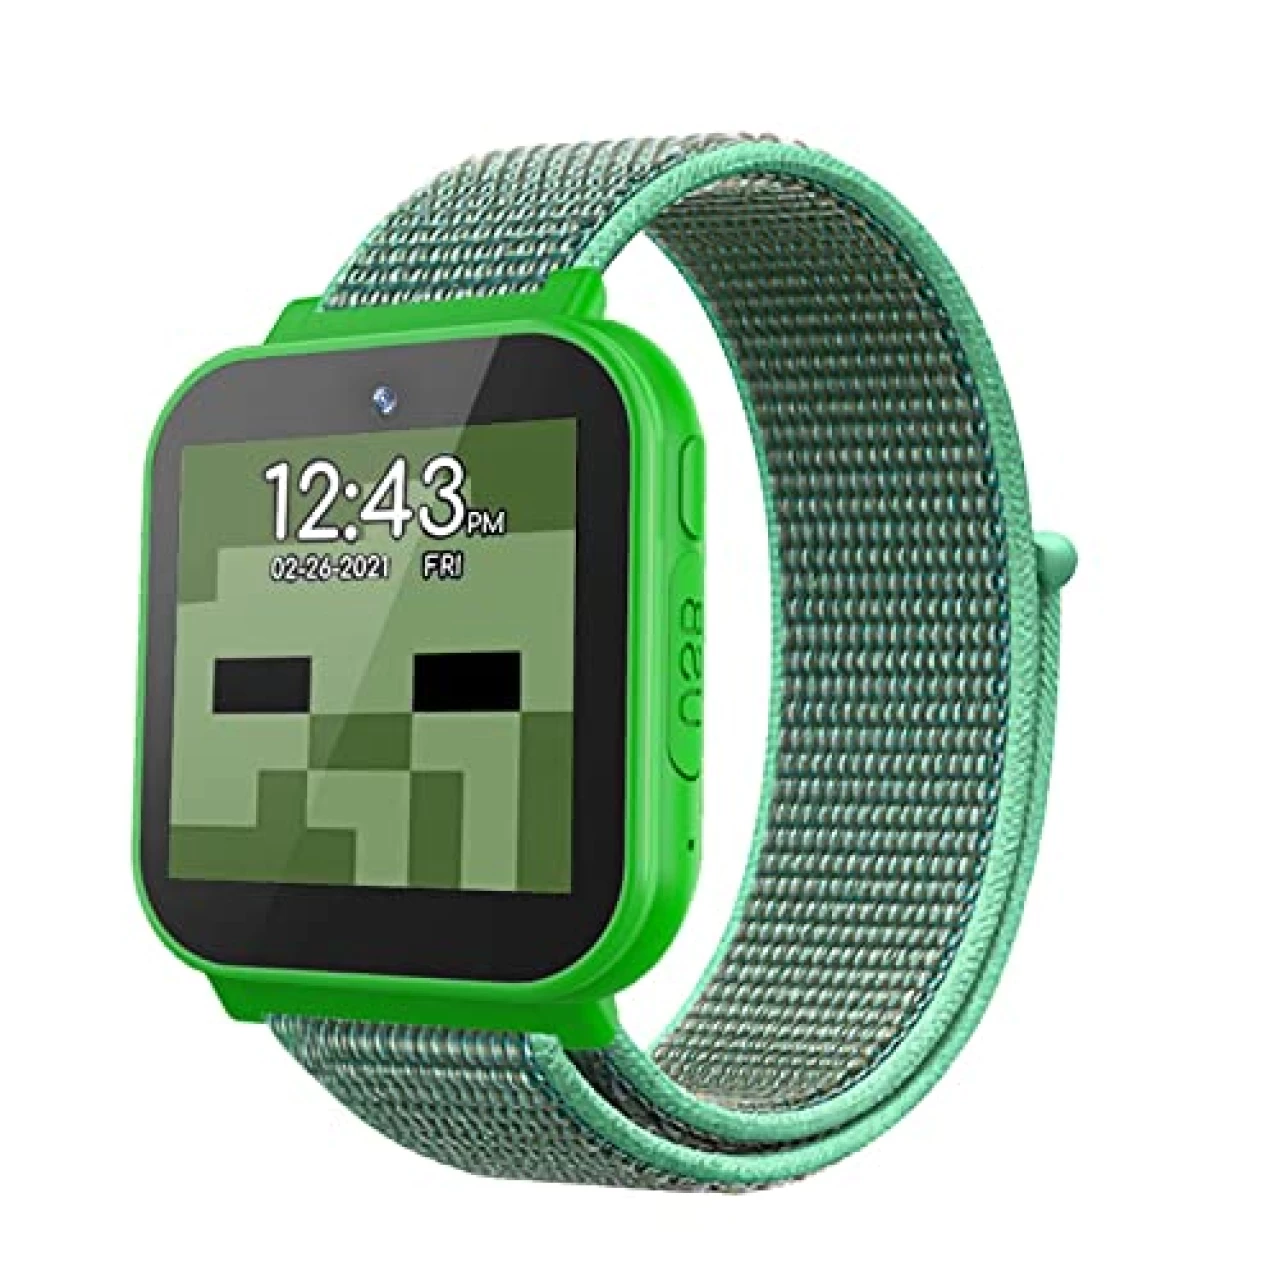 Kuaguozhe Nylon Bands Compatible with Minecraft, Accutime, JoJo Siwa, Sonic, Frozen Kids Touchscreen Interacitve Smart Watches, Hook &amp; Loop Watch Bands for Boys and Girls